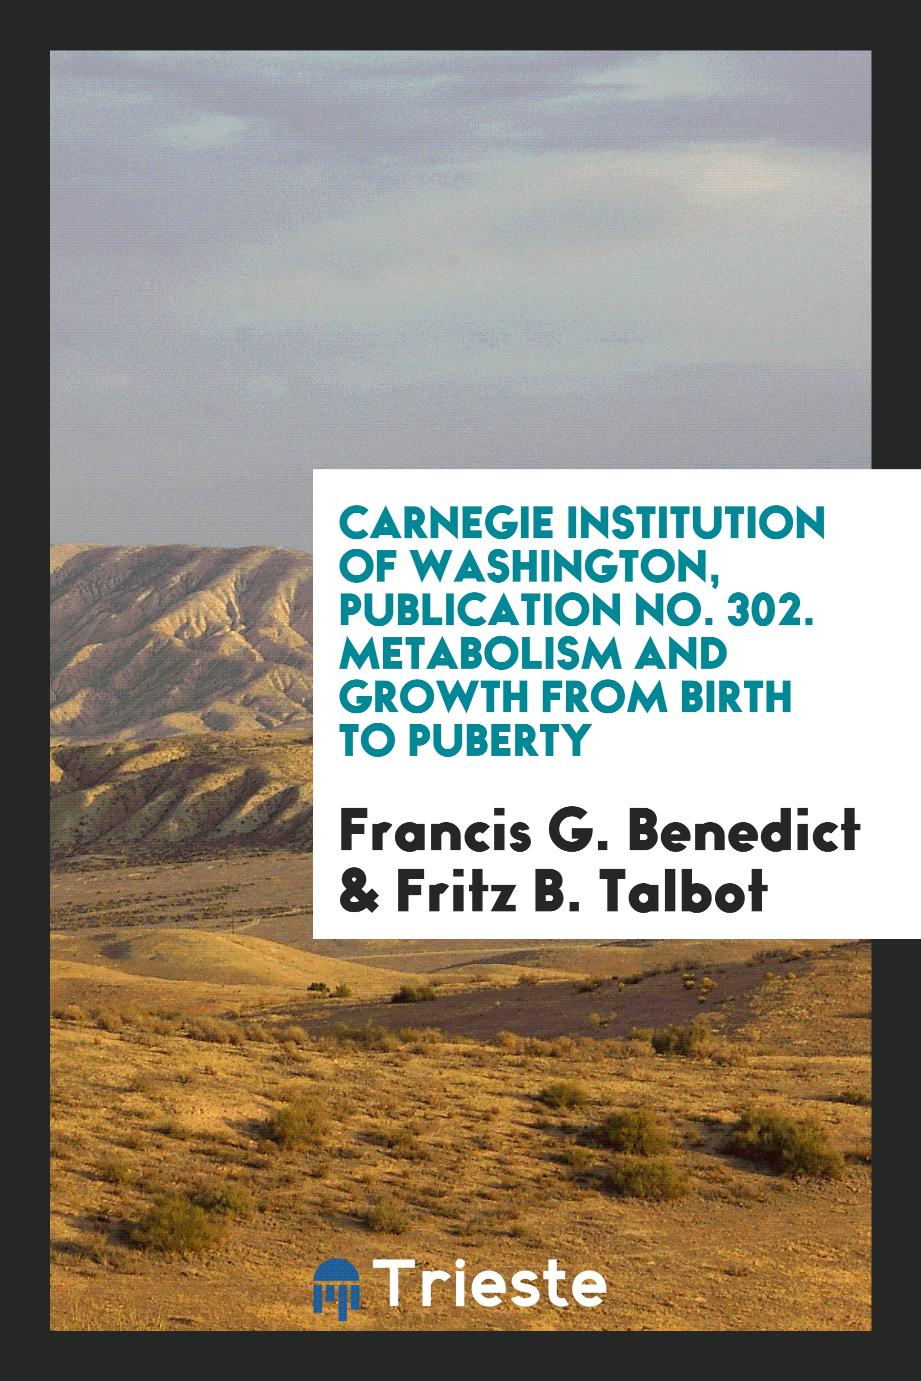 Carnegie Institution of Washington, publication No. 302. Metabolism and growth from birth to puberty